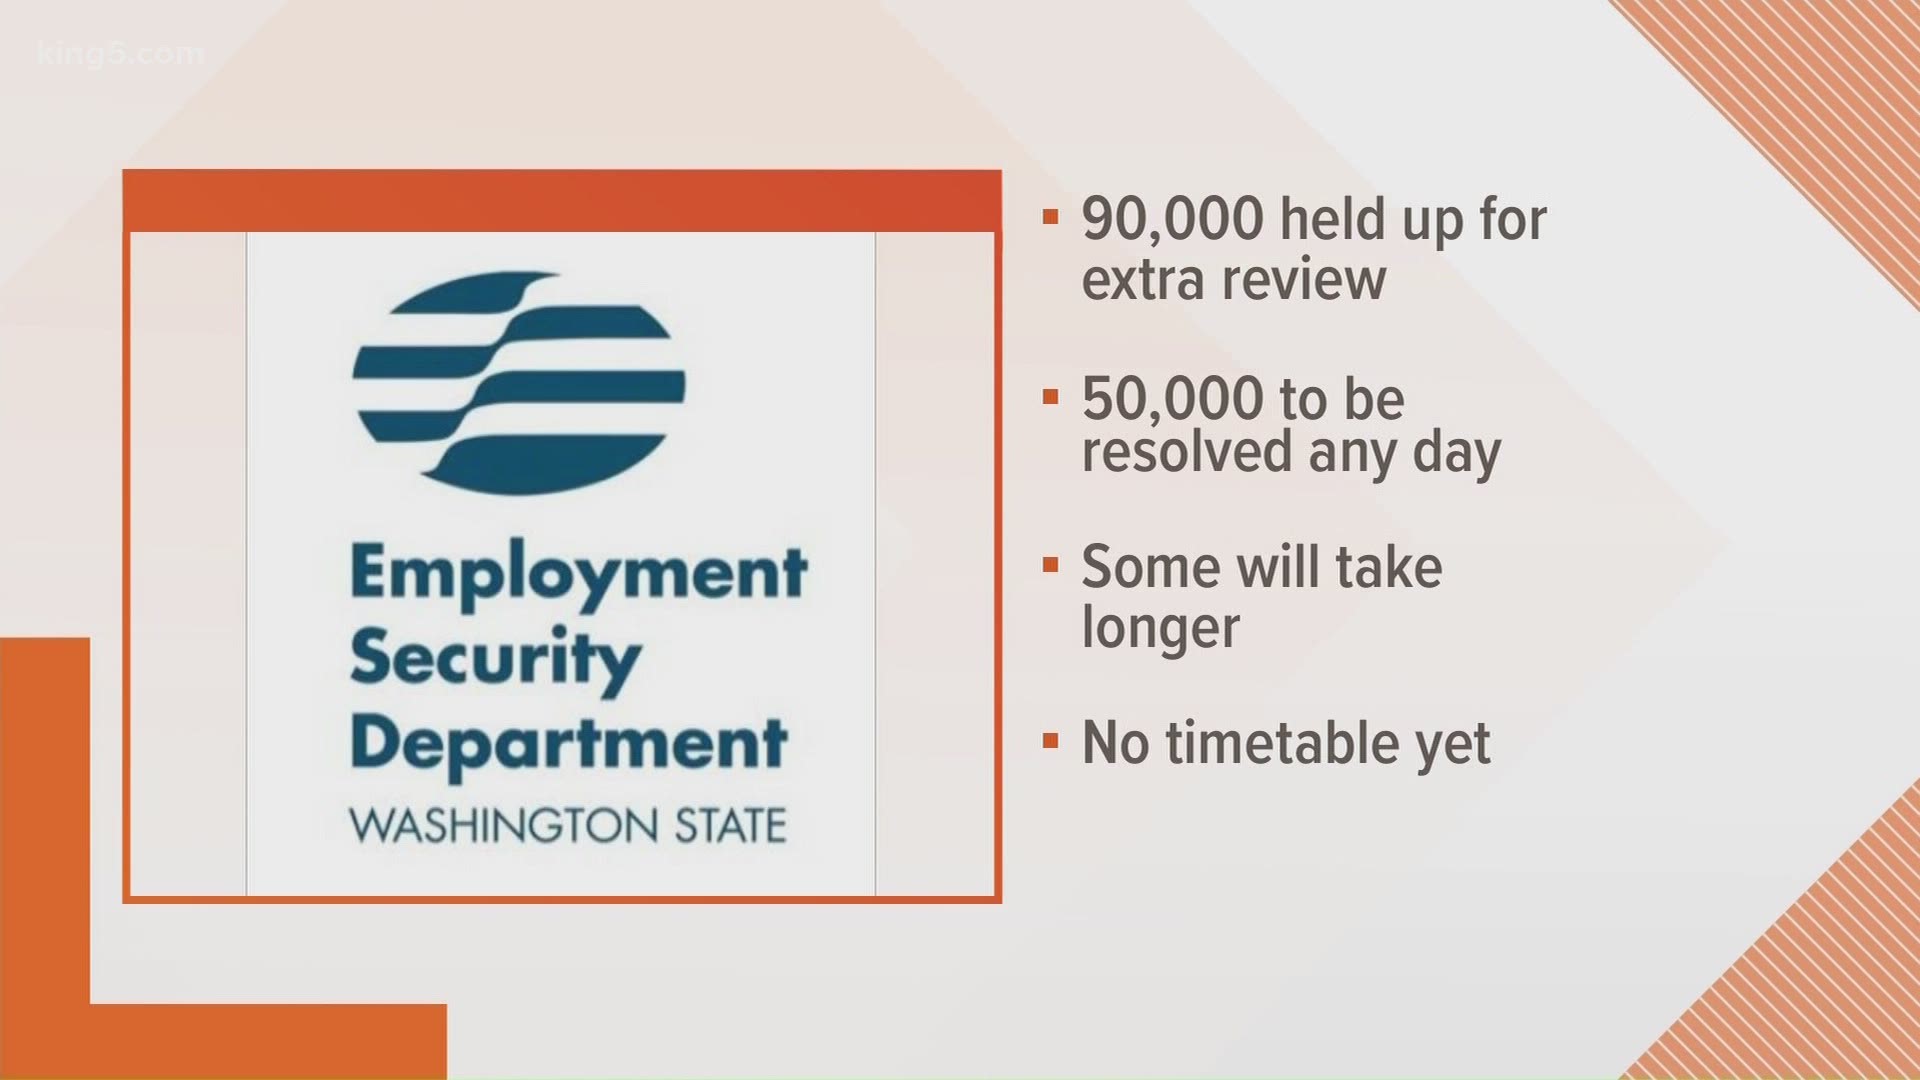 Approximately 90,000 unemployment claims are still being held for review.